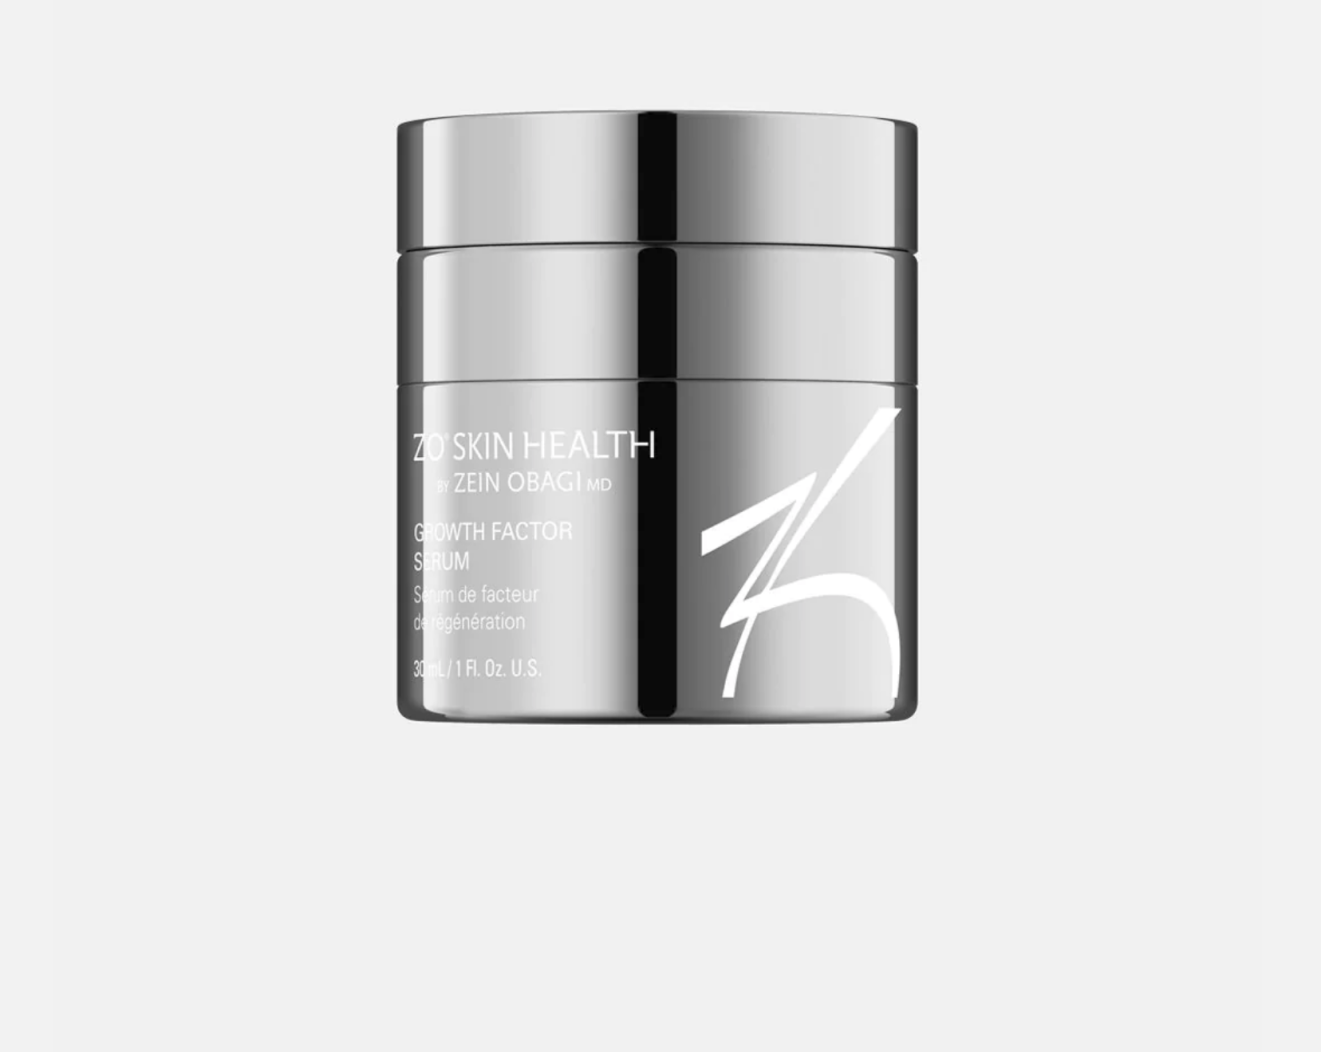 Growth factor Serum by ZO